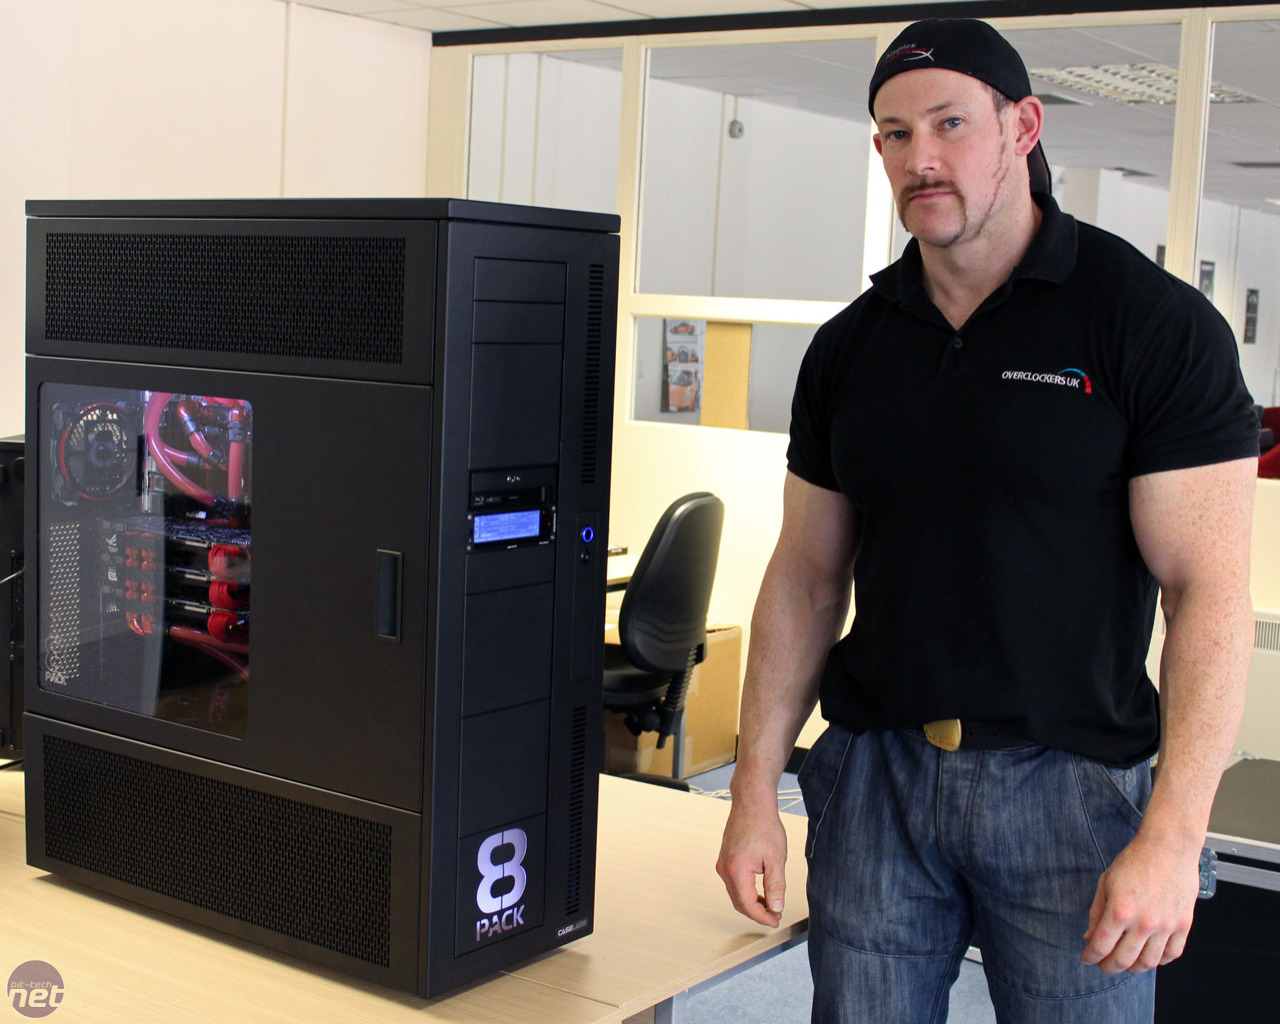 Overclockers UK 8Pack Systems Preview and Interview | bit-tech.net
